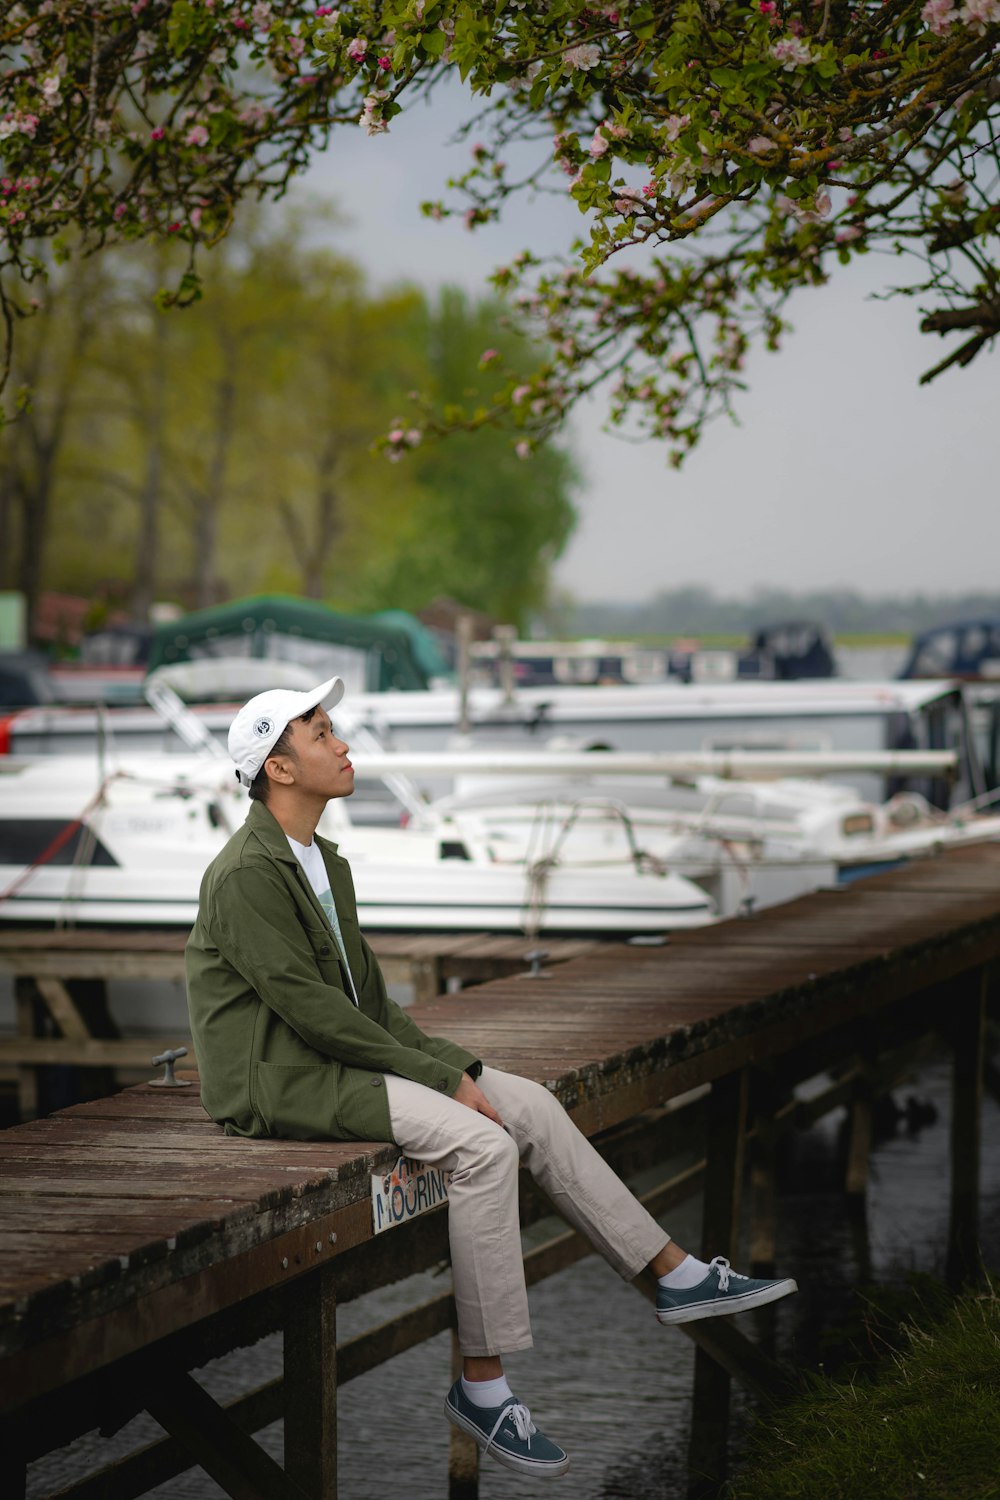 a man sitting on a wooden dock next to boats